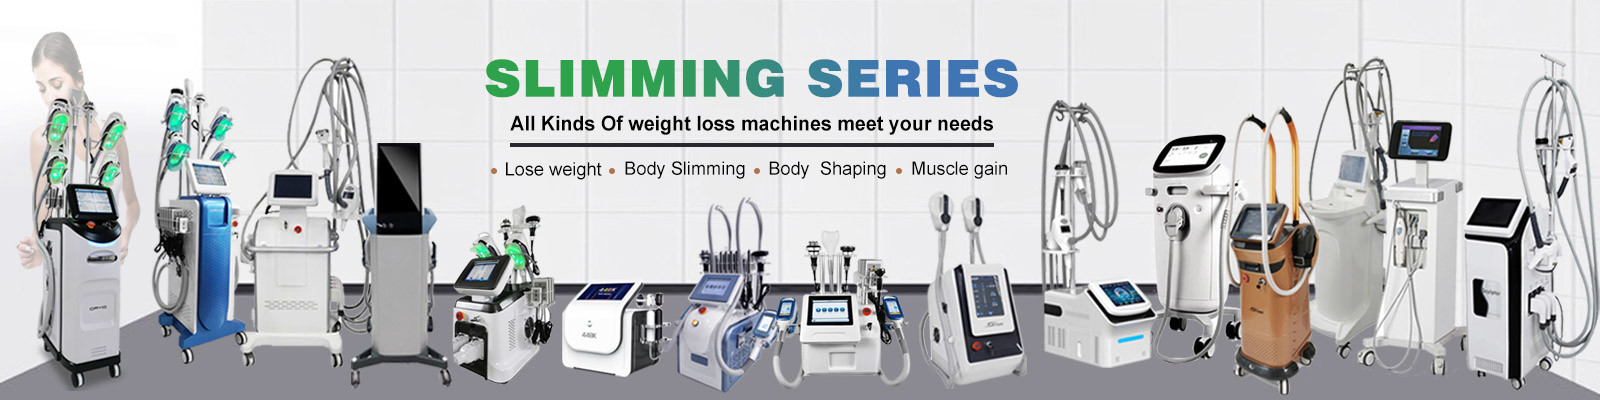 Diode Laser Hair Removal Machine, Triple Wavelength Laser Hair Removal, IPL Hair Removal Machine, Vacuum Roller Slimming Machine, Picosecond Laser Machine, Cryolipolysis Machine, Microneedling Machine, Microdermabrasion Machine, Radio Frequency Equipments, Anti Wrinkle Machines, PDT Machines, CO2 Fractional Laser Machine, Oxygen Jet Machine, HIFU Machine, Promotion - Weifang Evamed Technology Co.,Ltd